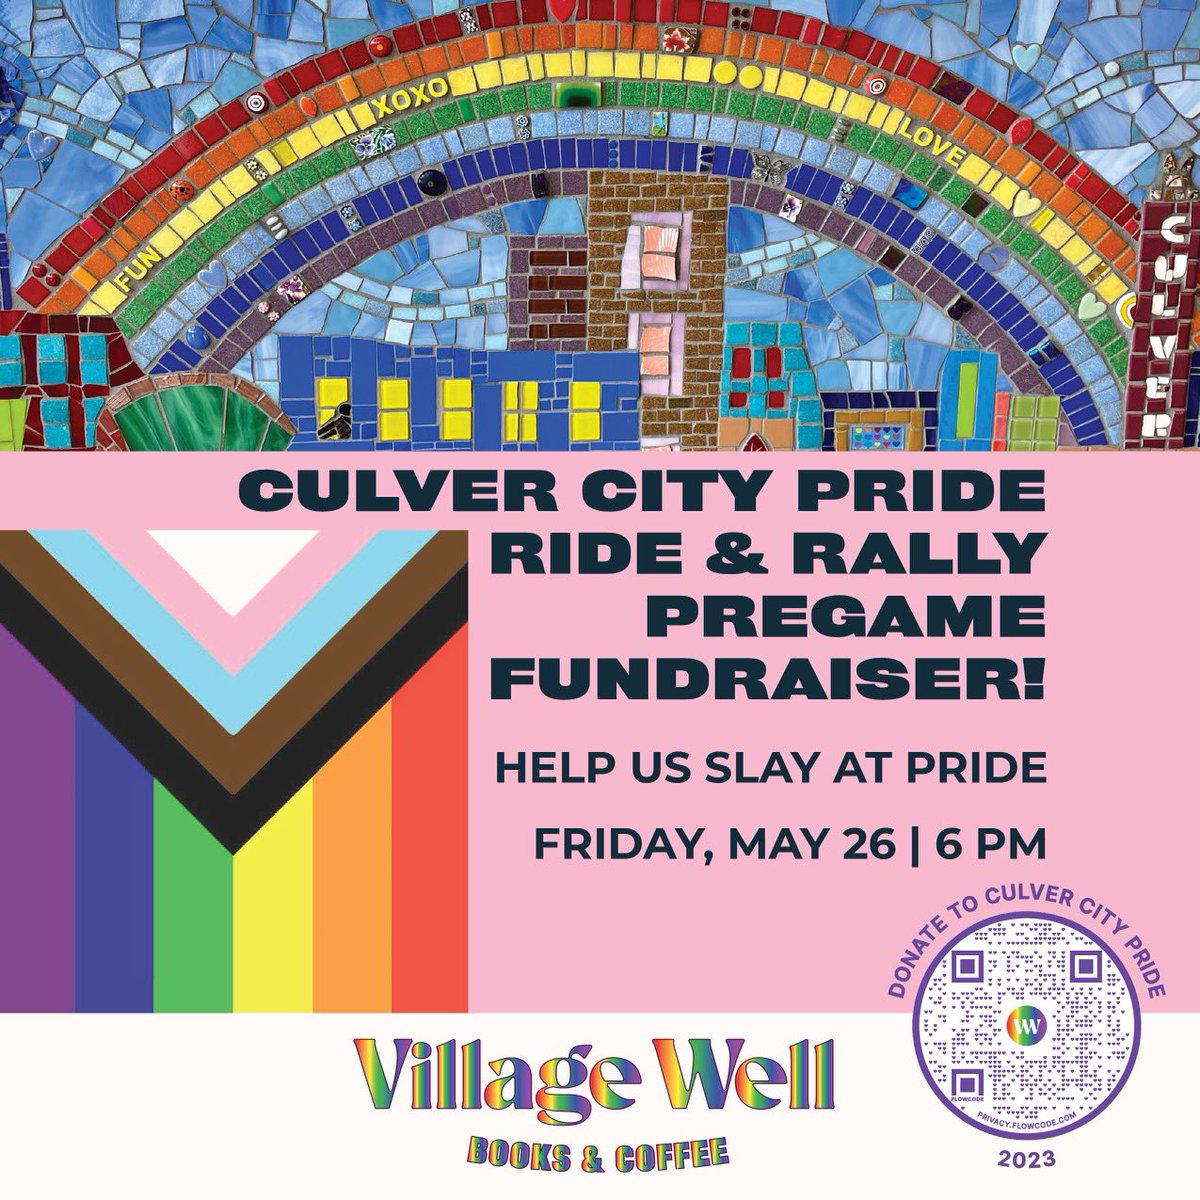 THIS FRIDAY! HELP US SLAY AT PRIDE 🏳️‍🌈📚☕️
Buy some goods at Village Well Books & Coffee @villagewellcc & you will support us!!! 20% of all purchases this May 26th starting at 6pm at the Village Well will go to Culver City Pride ✨🌈